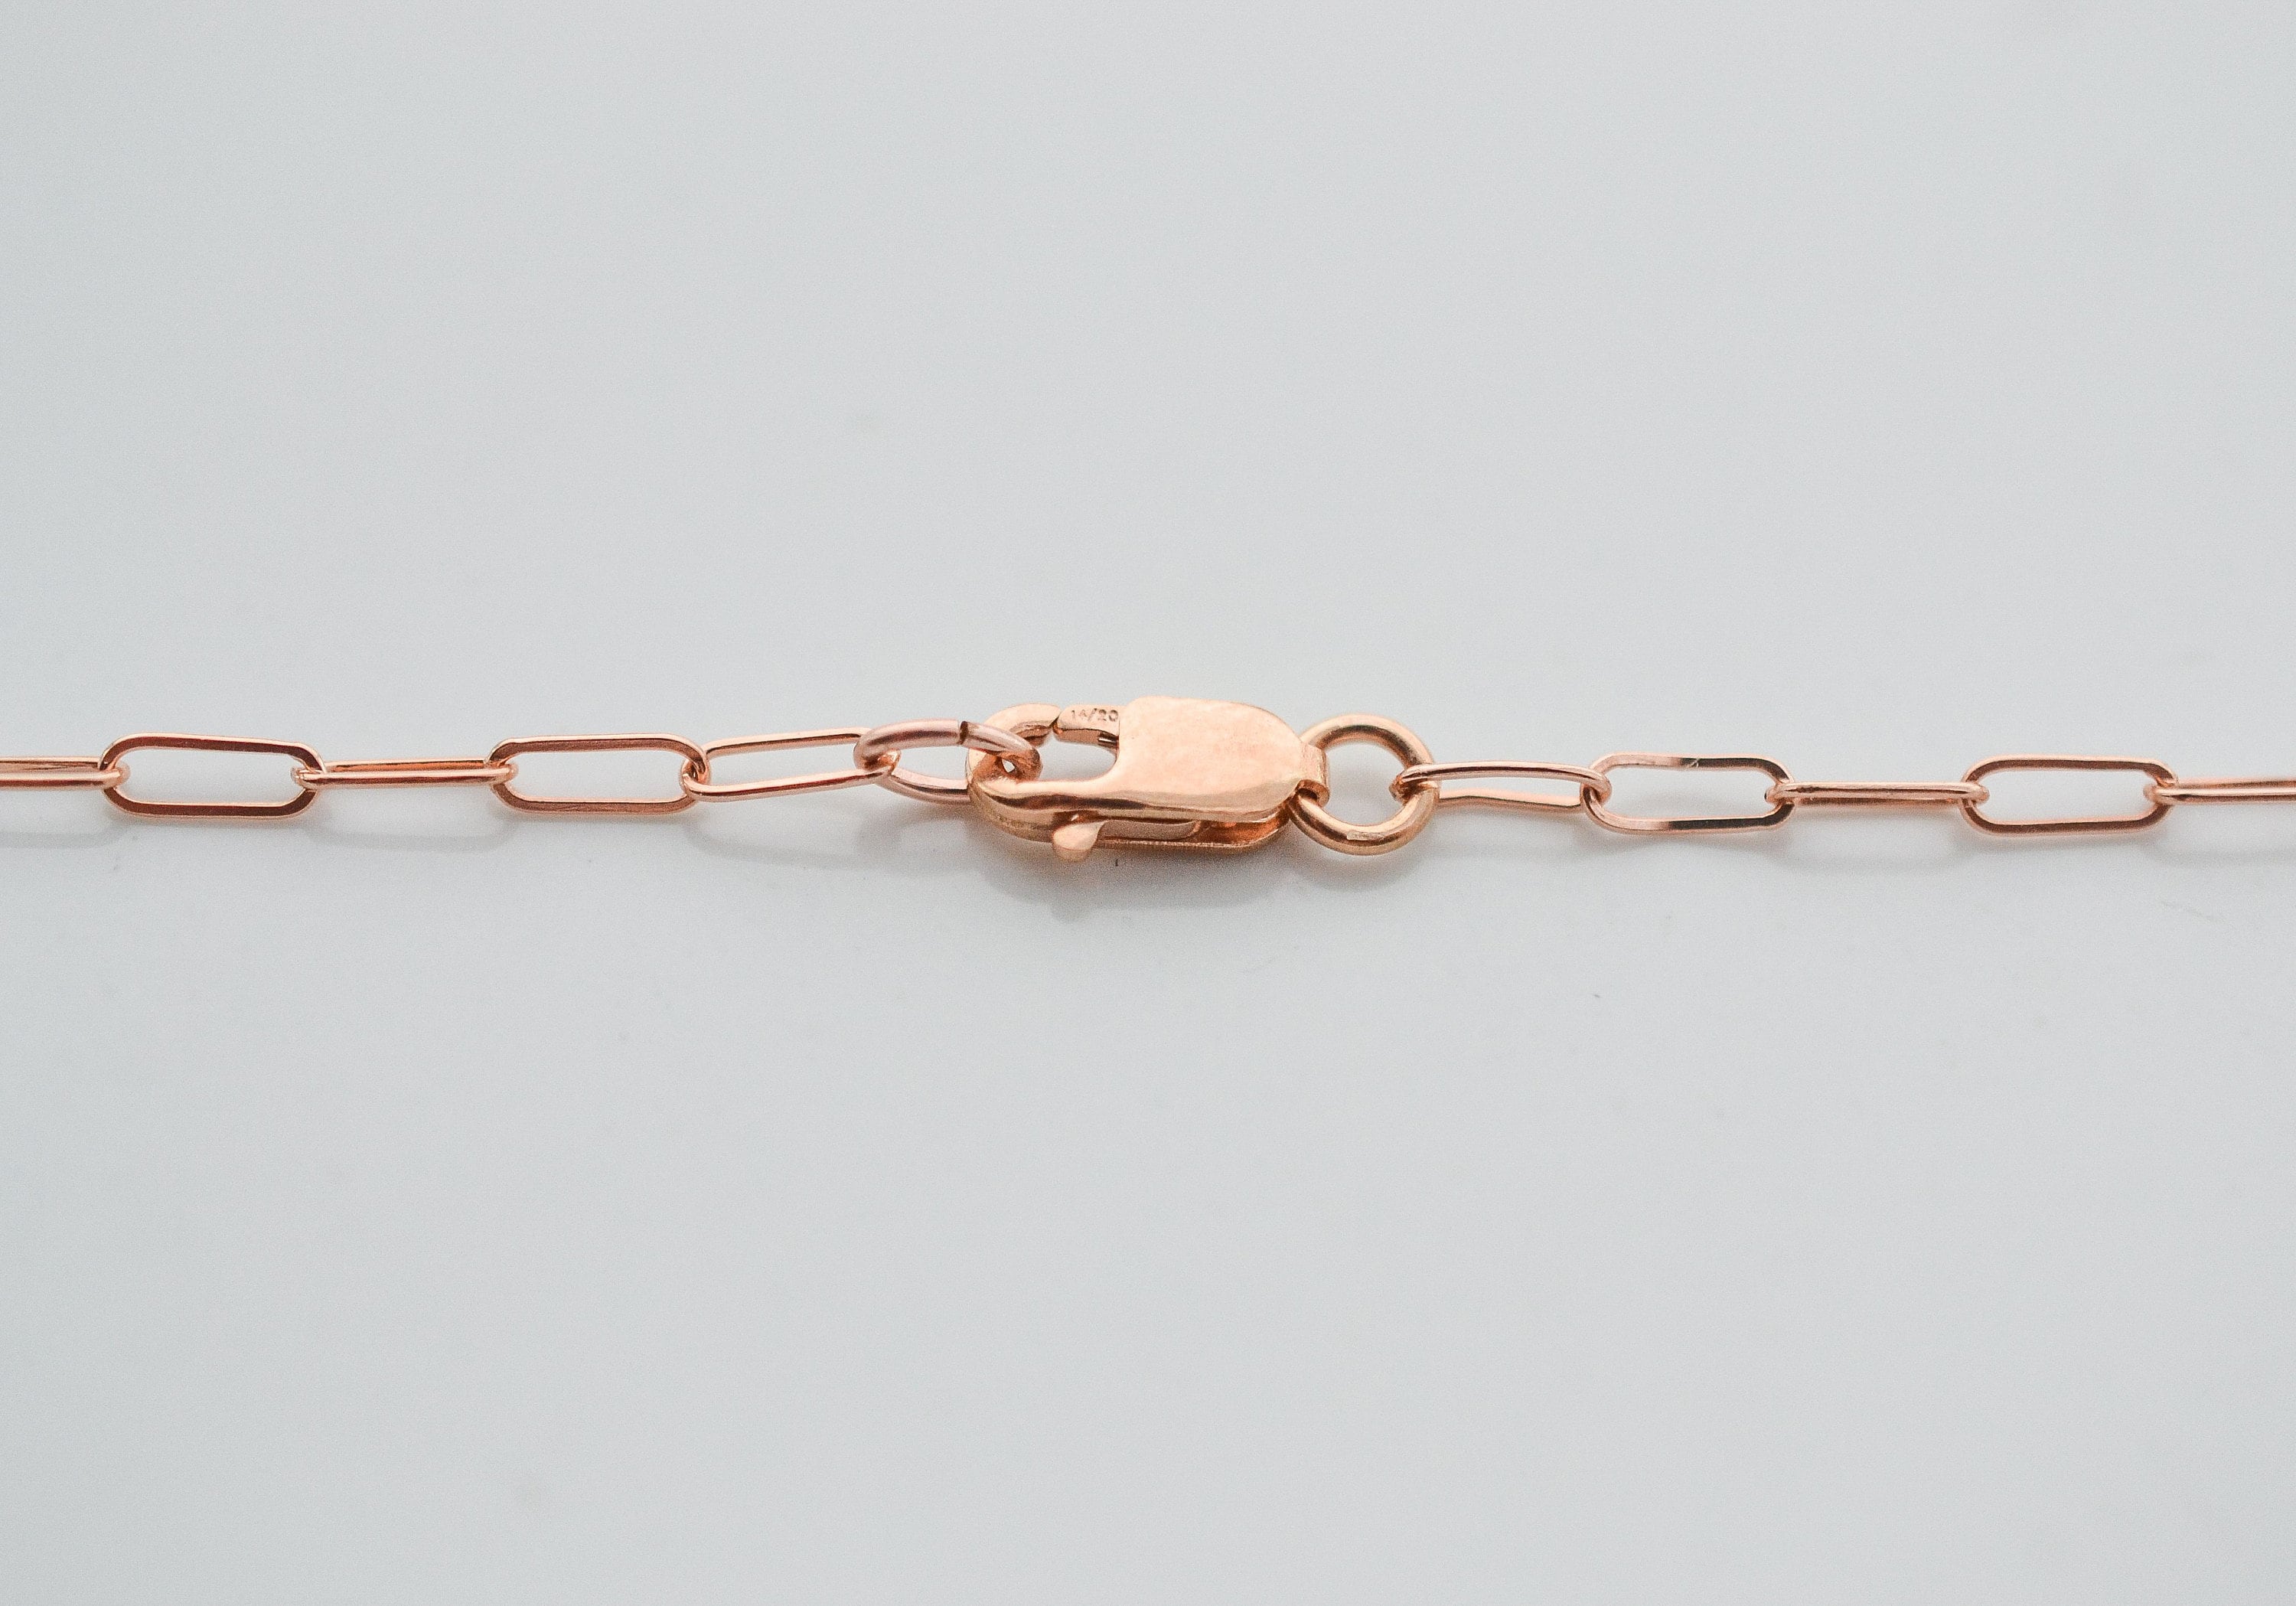 9ct Rose Gold Plated 2mm Belcher Rolo Chain Necklace 14 - 24 Inch by The Chain Hut